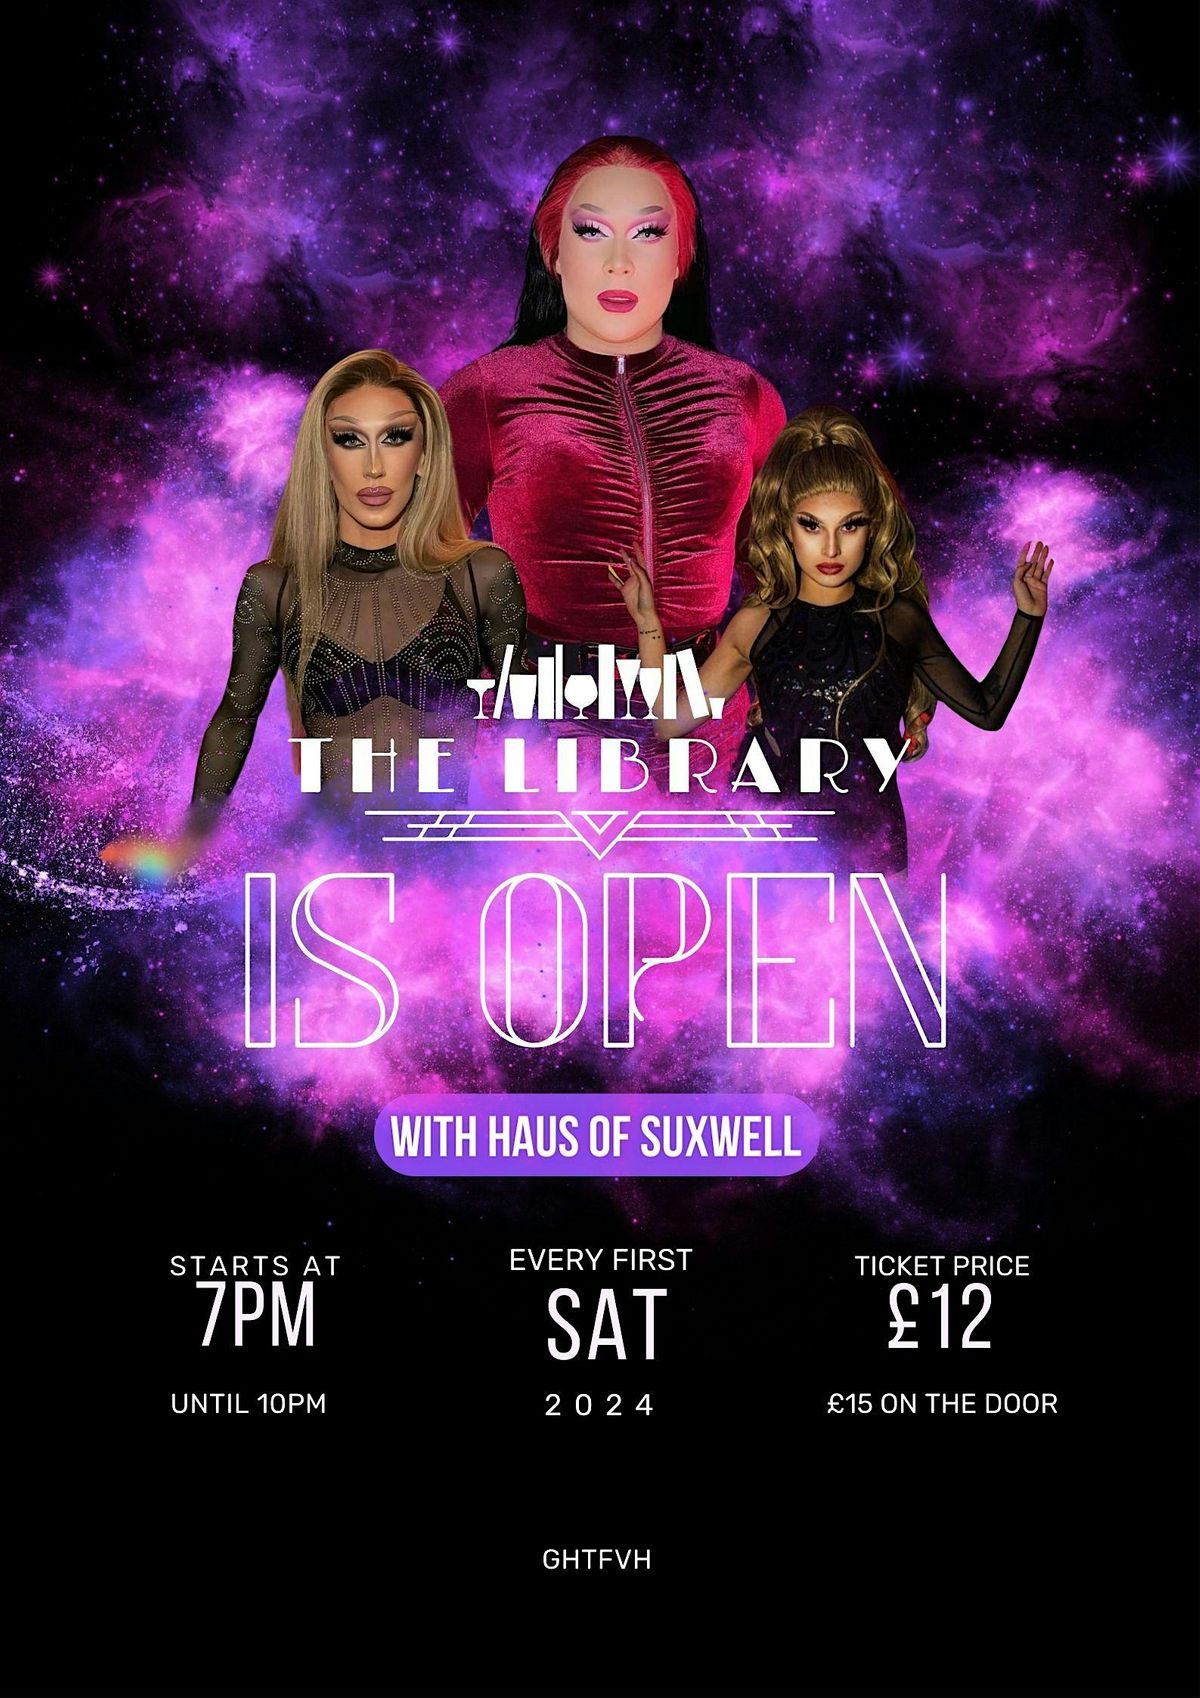 The Library is open with the Haus of Suxwell